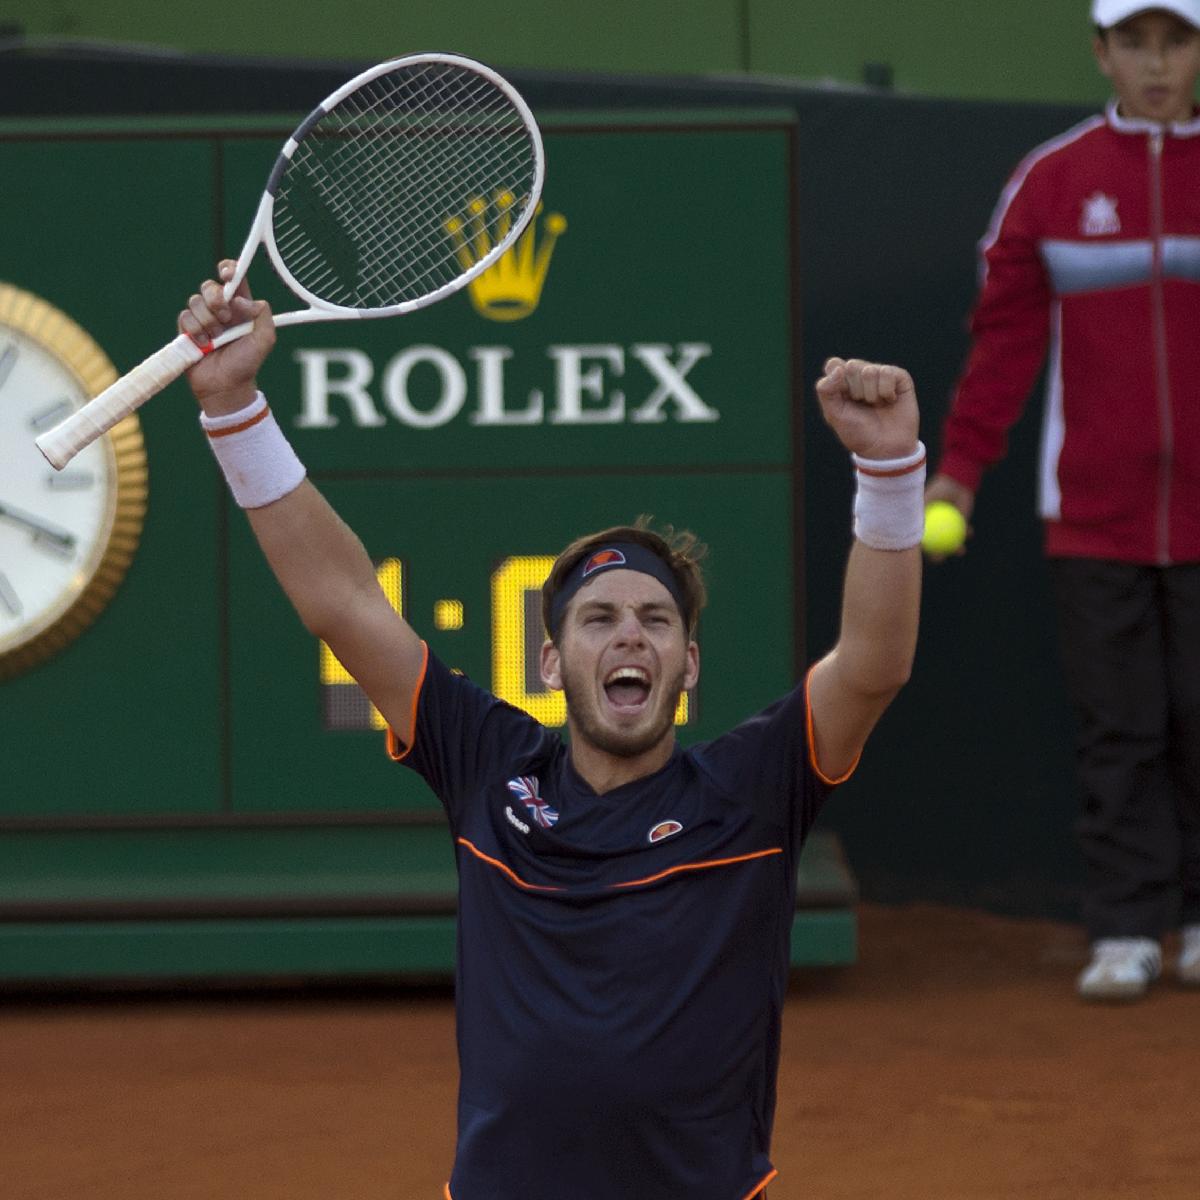 Davis Cup Tennis 2018 Friday Scores and Results, Updated Round 1